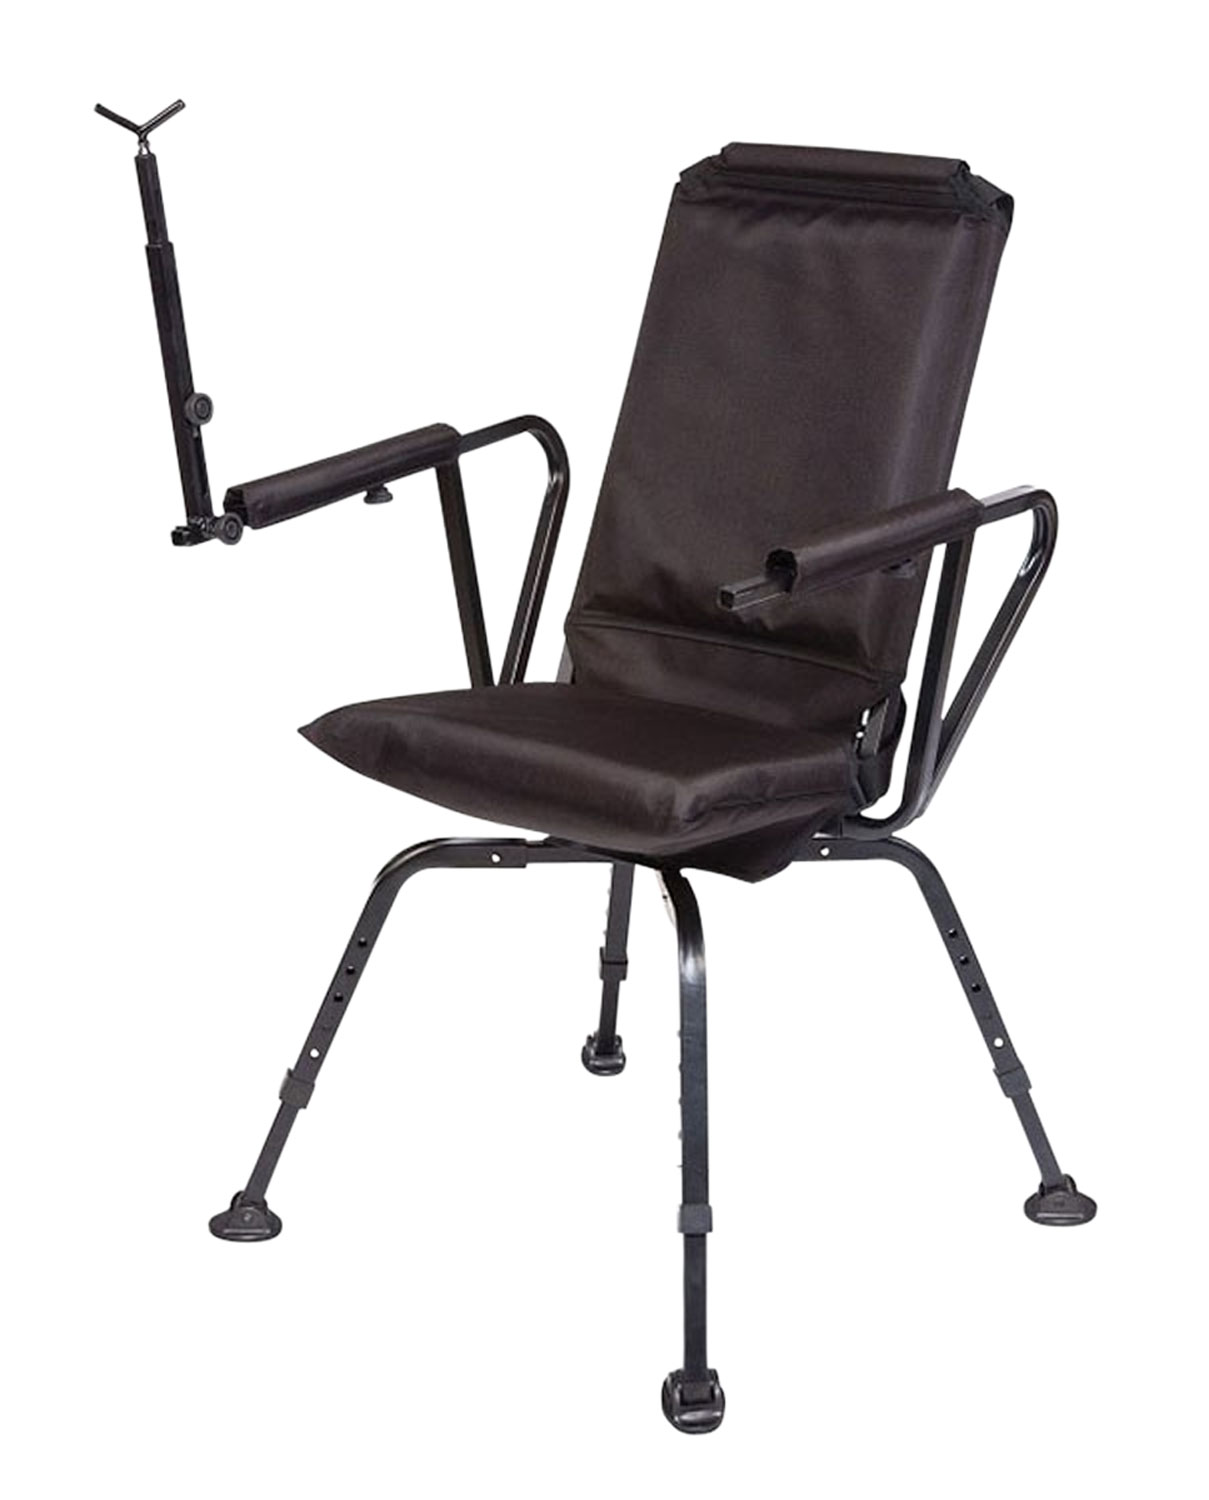 BENCHMASTER SNIPER SEAT 360 SHOOTING CHAIR